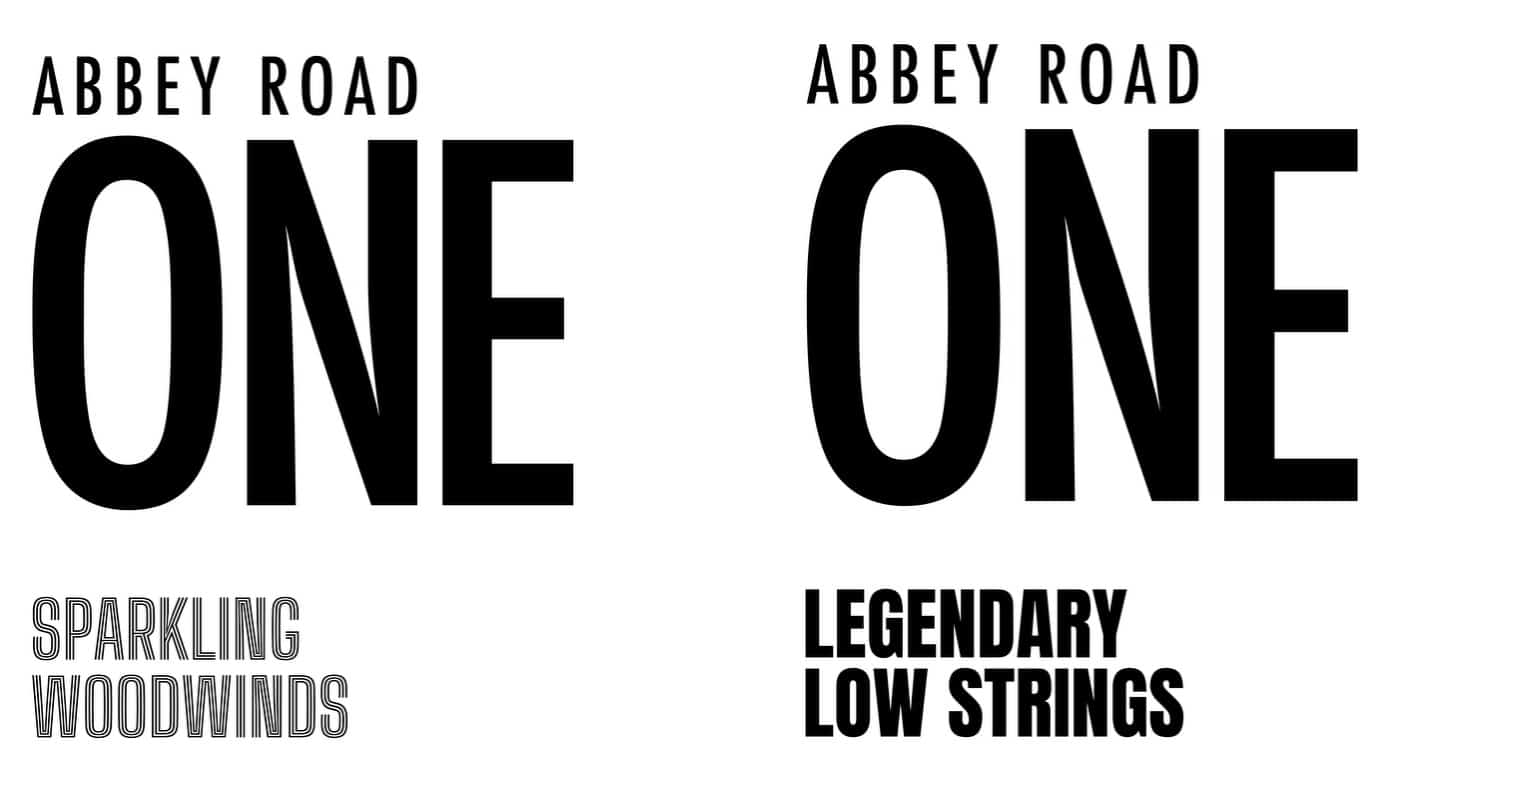 Spitfire Audio Advances Abbey Road One: Film Scoring Selections